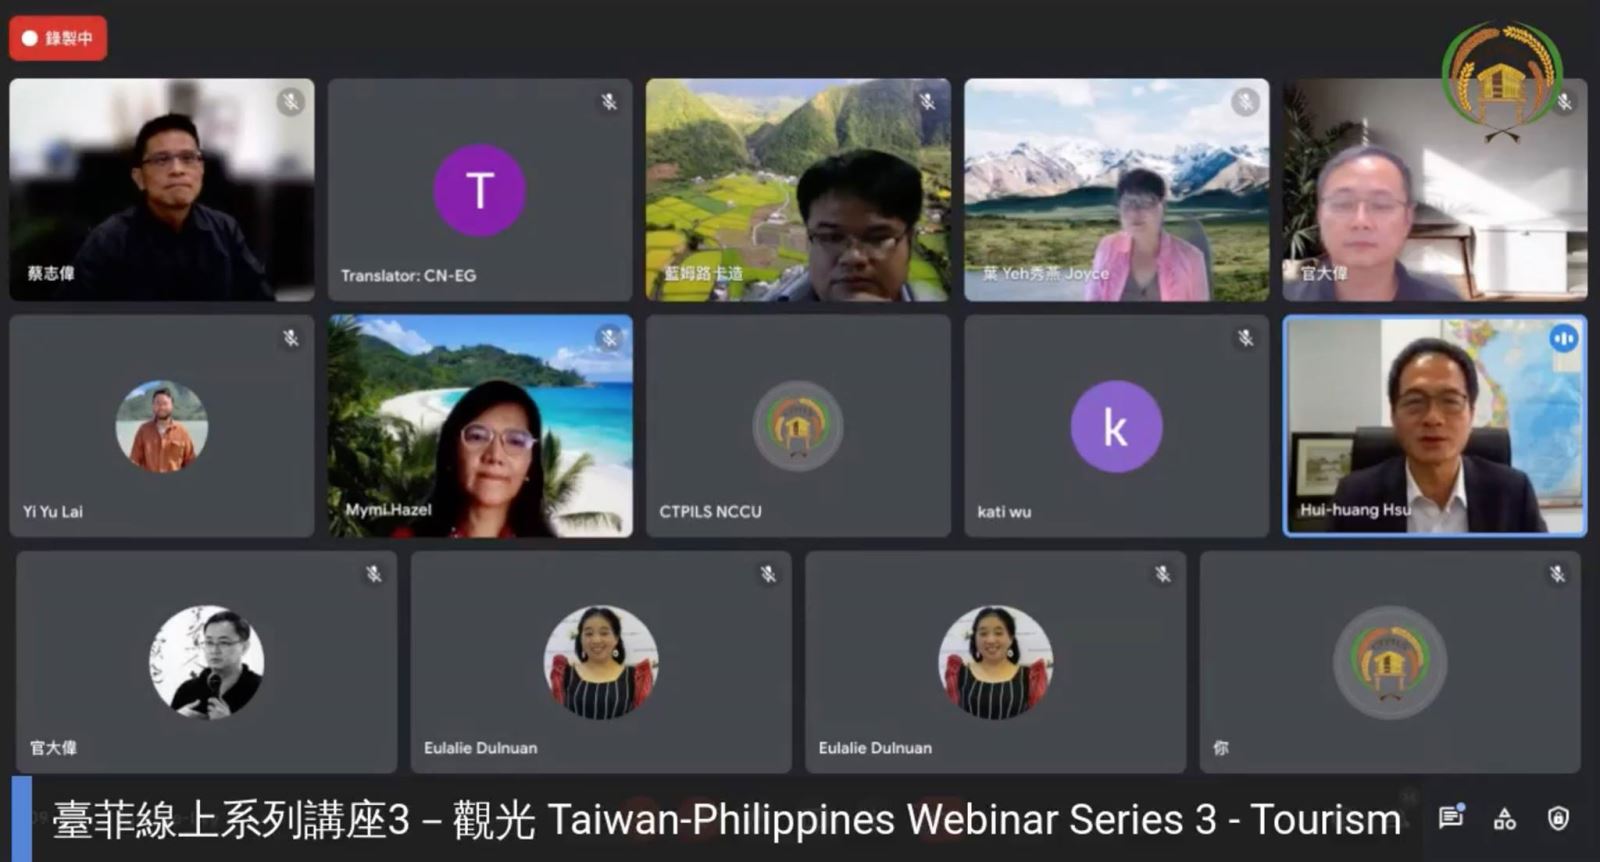 Hui-Huang Hsu, Director of Science and Technology Division, Taipei Economic and Cultural Office in Vietnam, attended this webinar as our distinguished guest and gave us a closing remark.